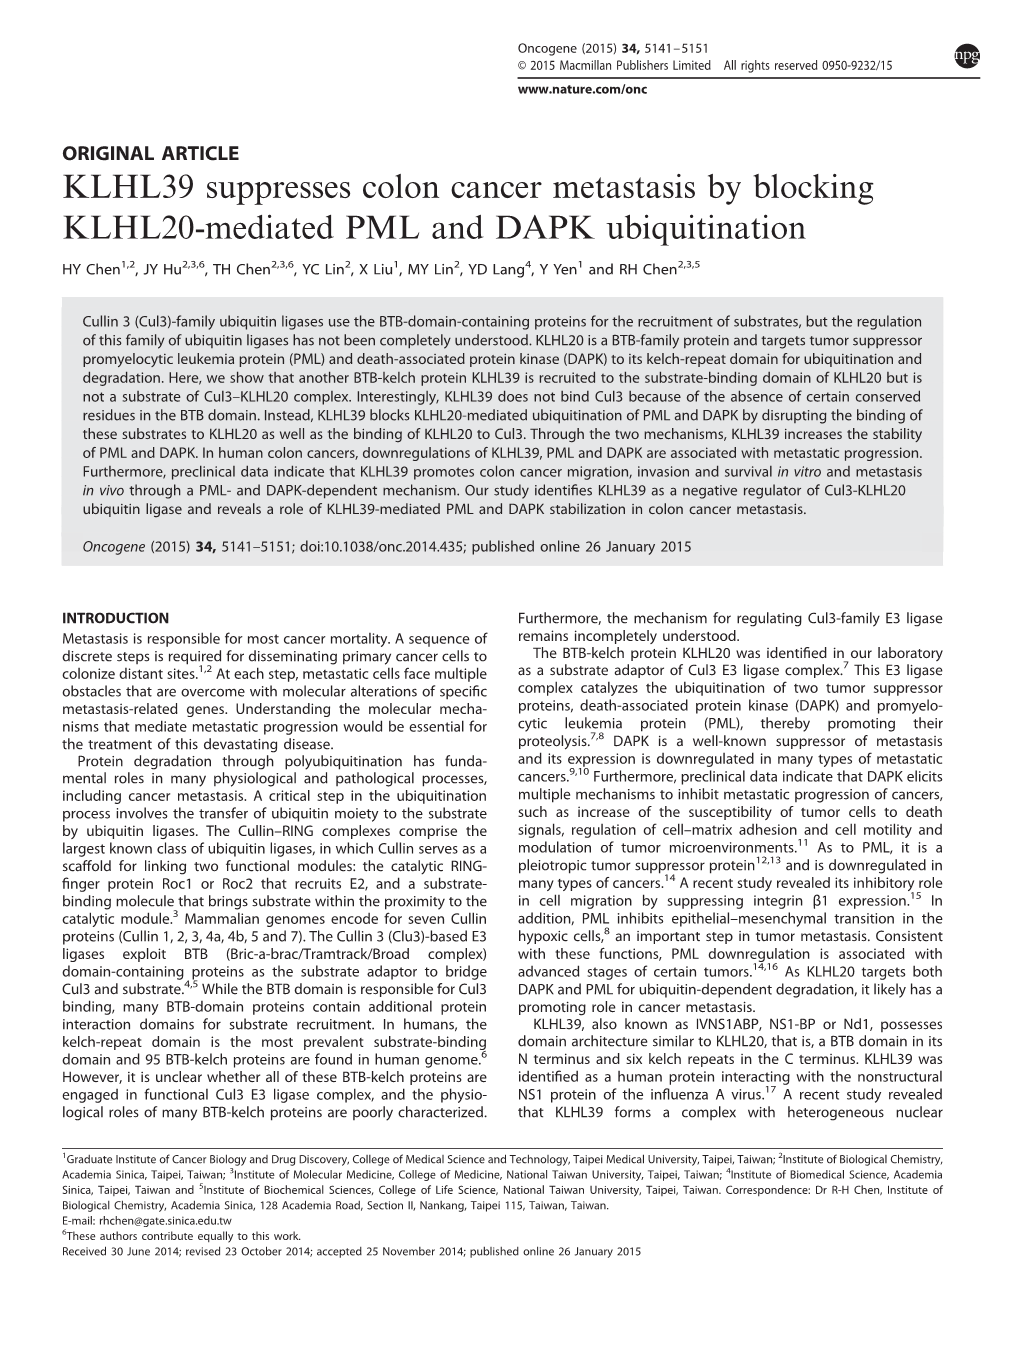 KLHL39 Suppresses Colon Cancer Metastasis by Blocking KLHL20-Mediated PML and DAPK Ubiquitination